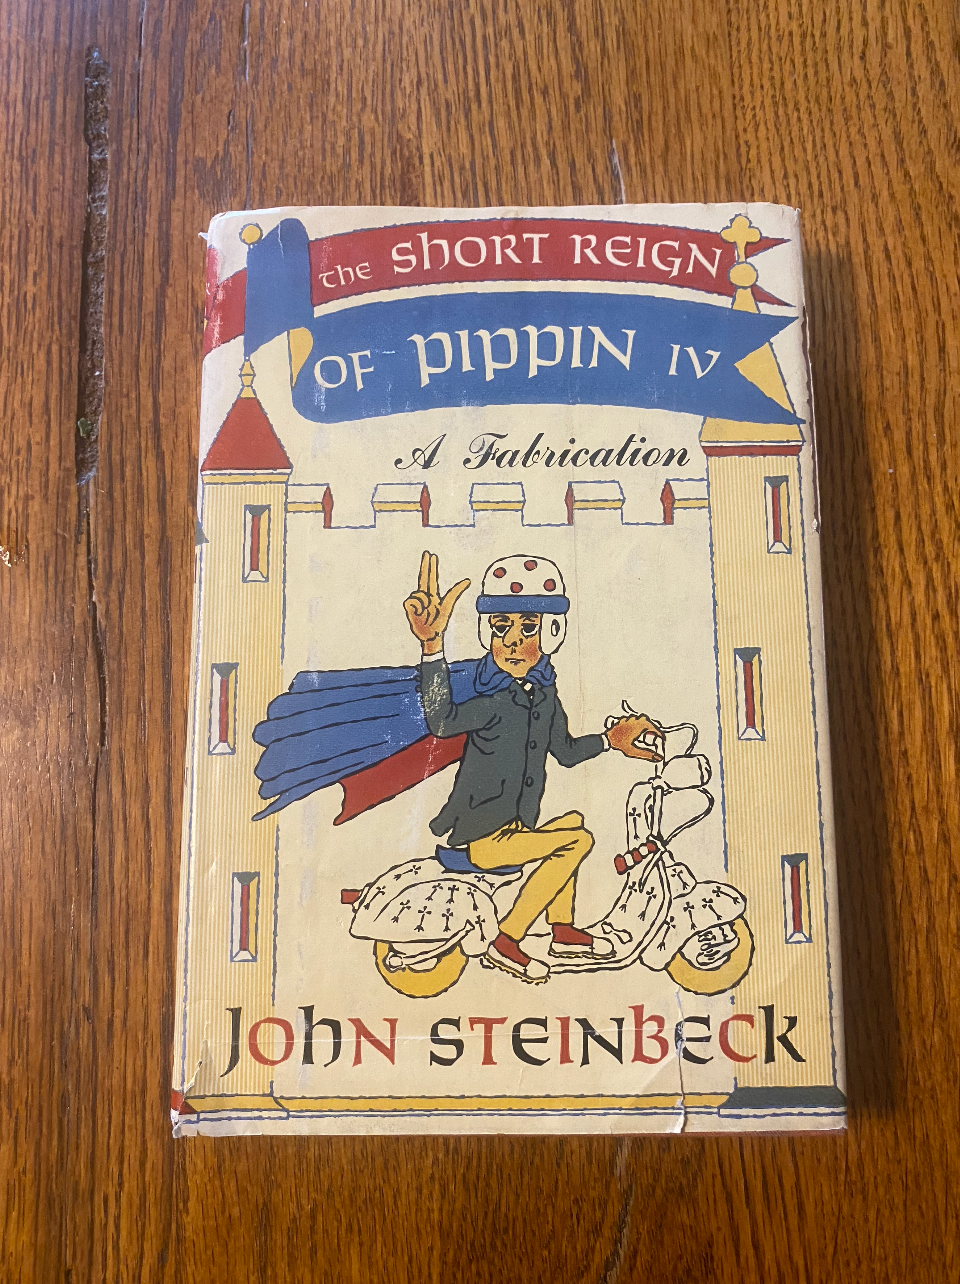 The Short Reign of Pippin IV - John Steinbeck (First Edition - 23rd Impression)